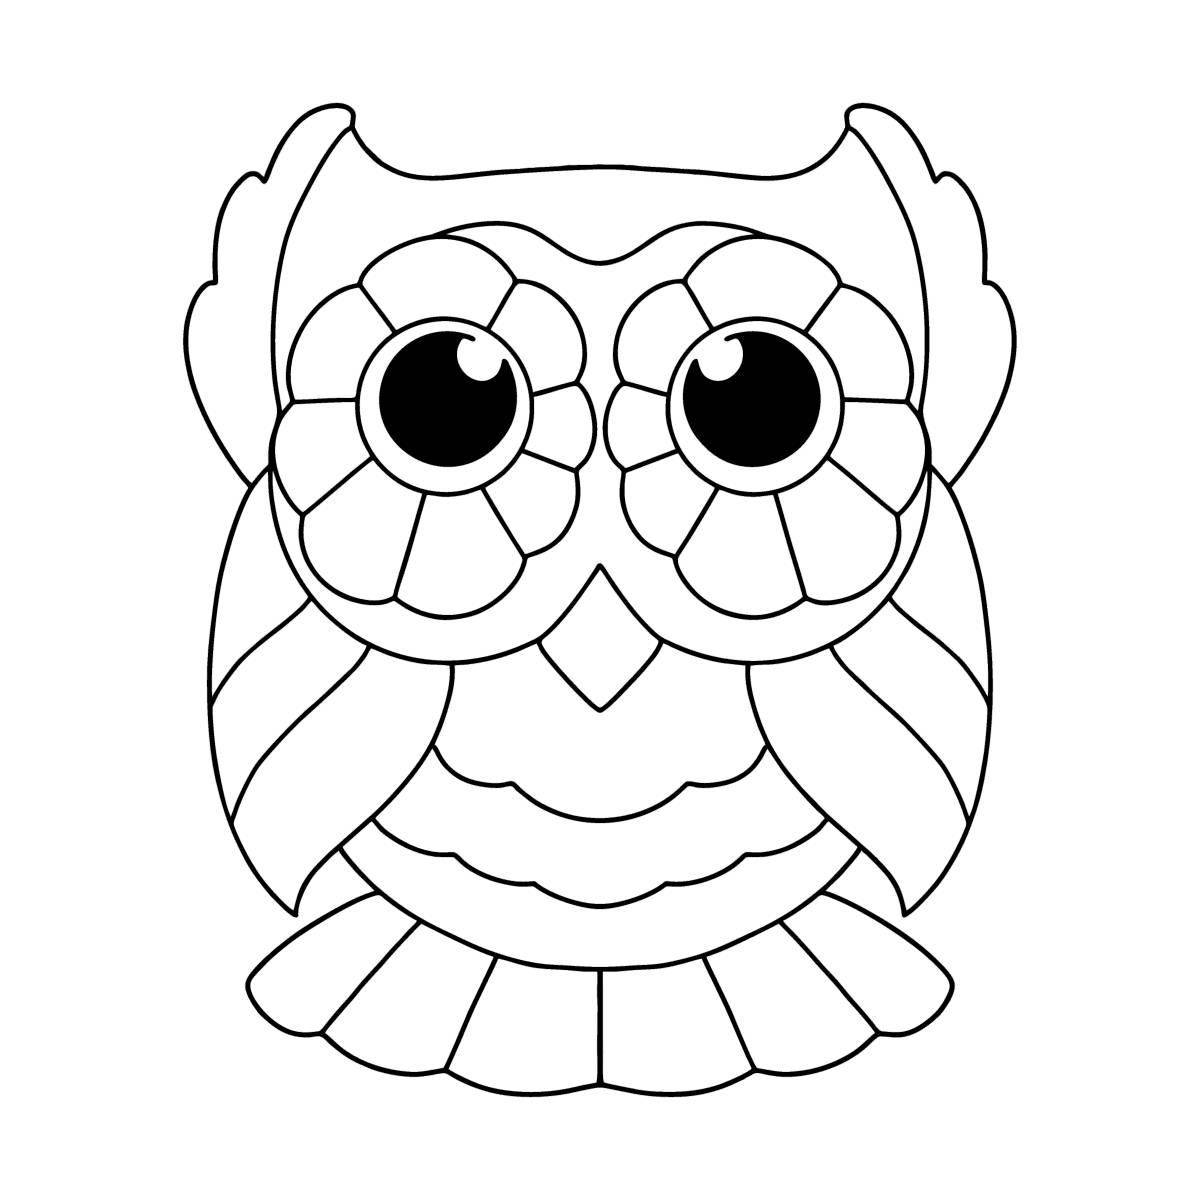 Coloring book joyful owl for children 6-7 years old